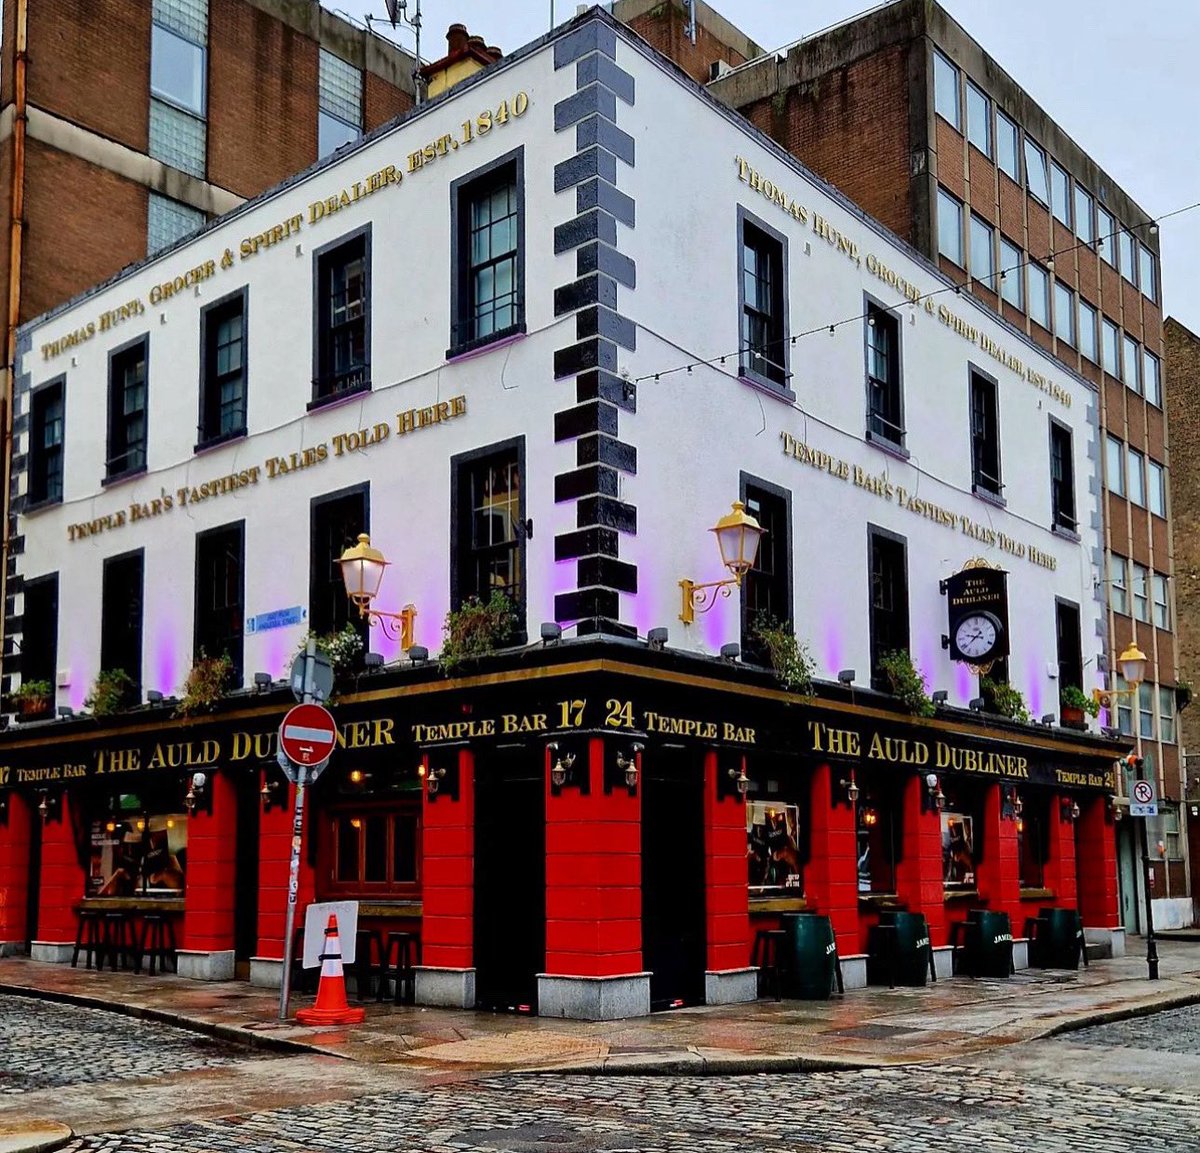 Enjoy a Taste of Tradition here in The Auld Dubliner ☘️

Open Every Day from 12pm

Live music and All Day Menu

Everything you need to a true Taste of Dublin ☘️

Thanks so our fantastic friends @TempleBarDub for this great 📸
#theaulddubliner #pub #templebar #dublinpubs